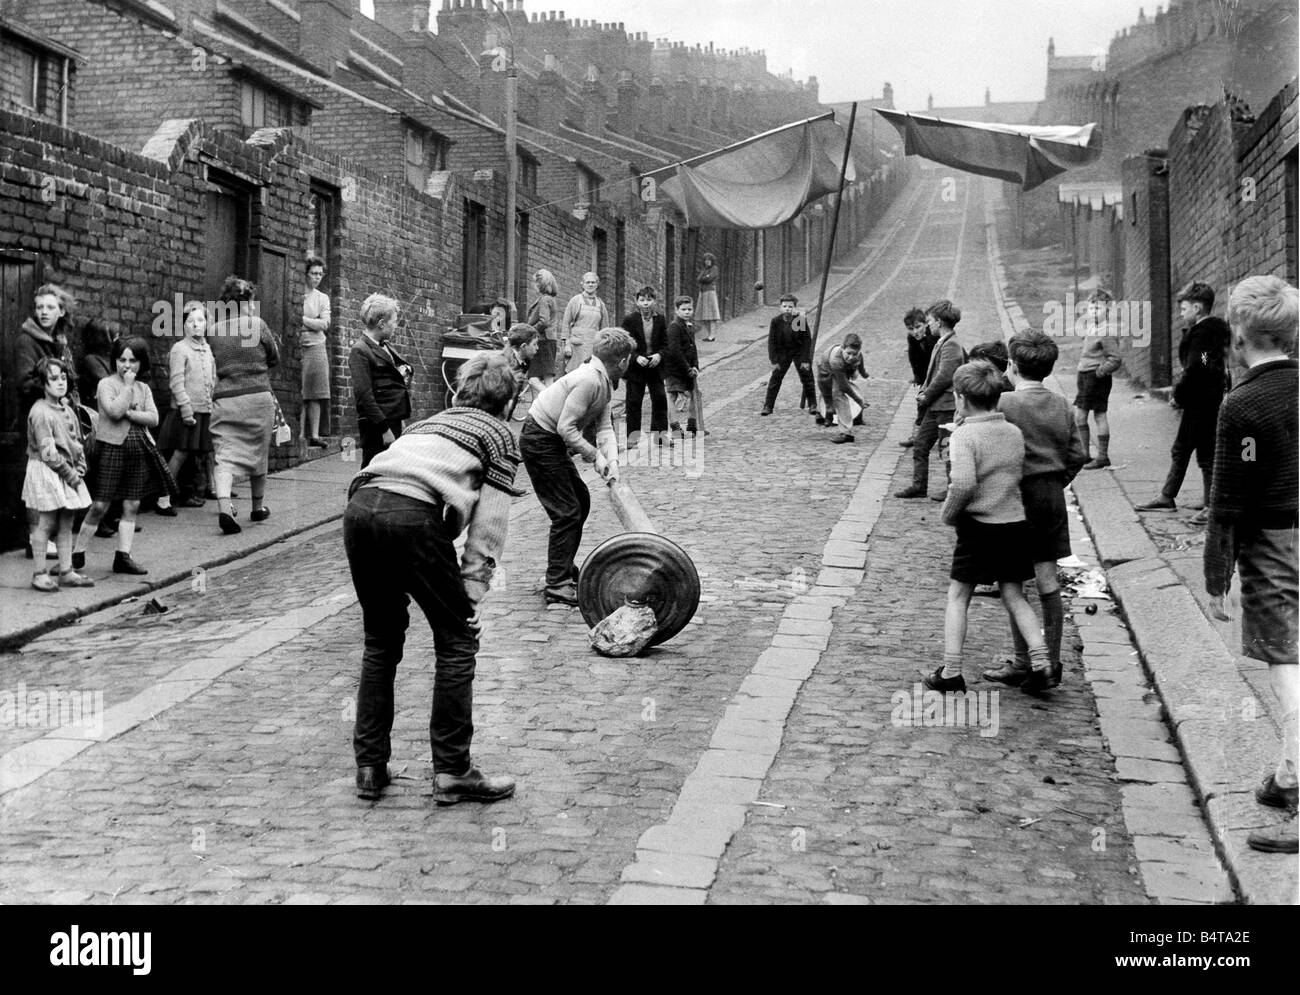 Children playing in the Scotswood area of Newcastle Stock Photo